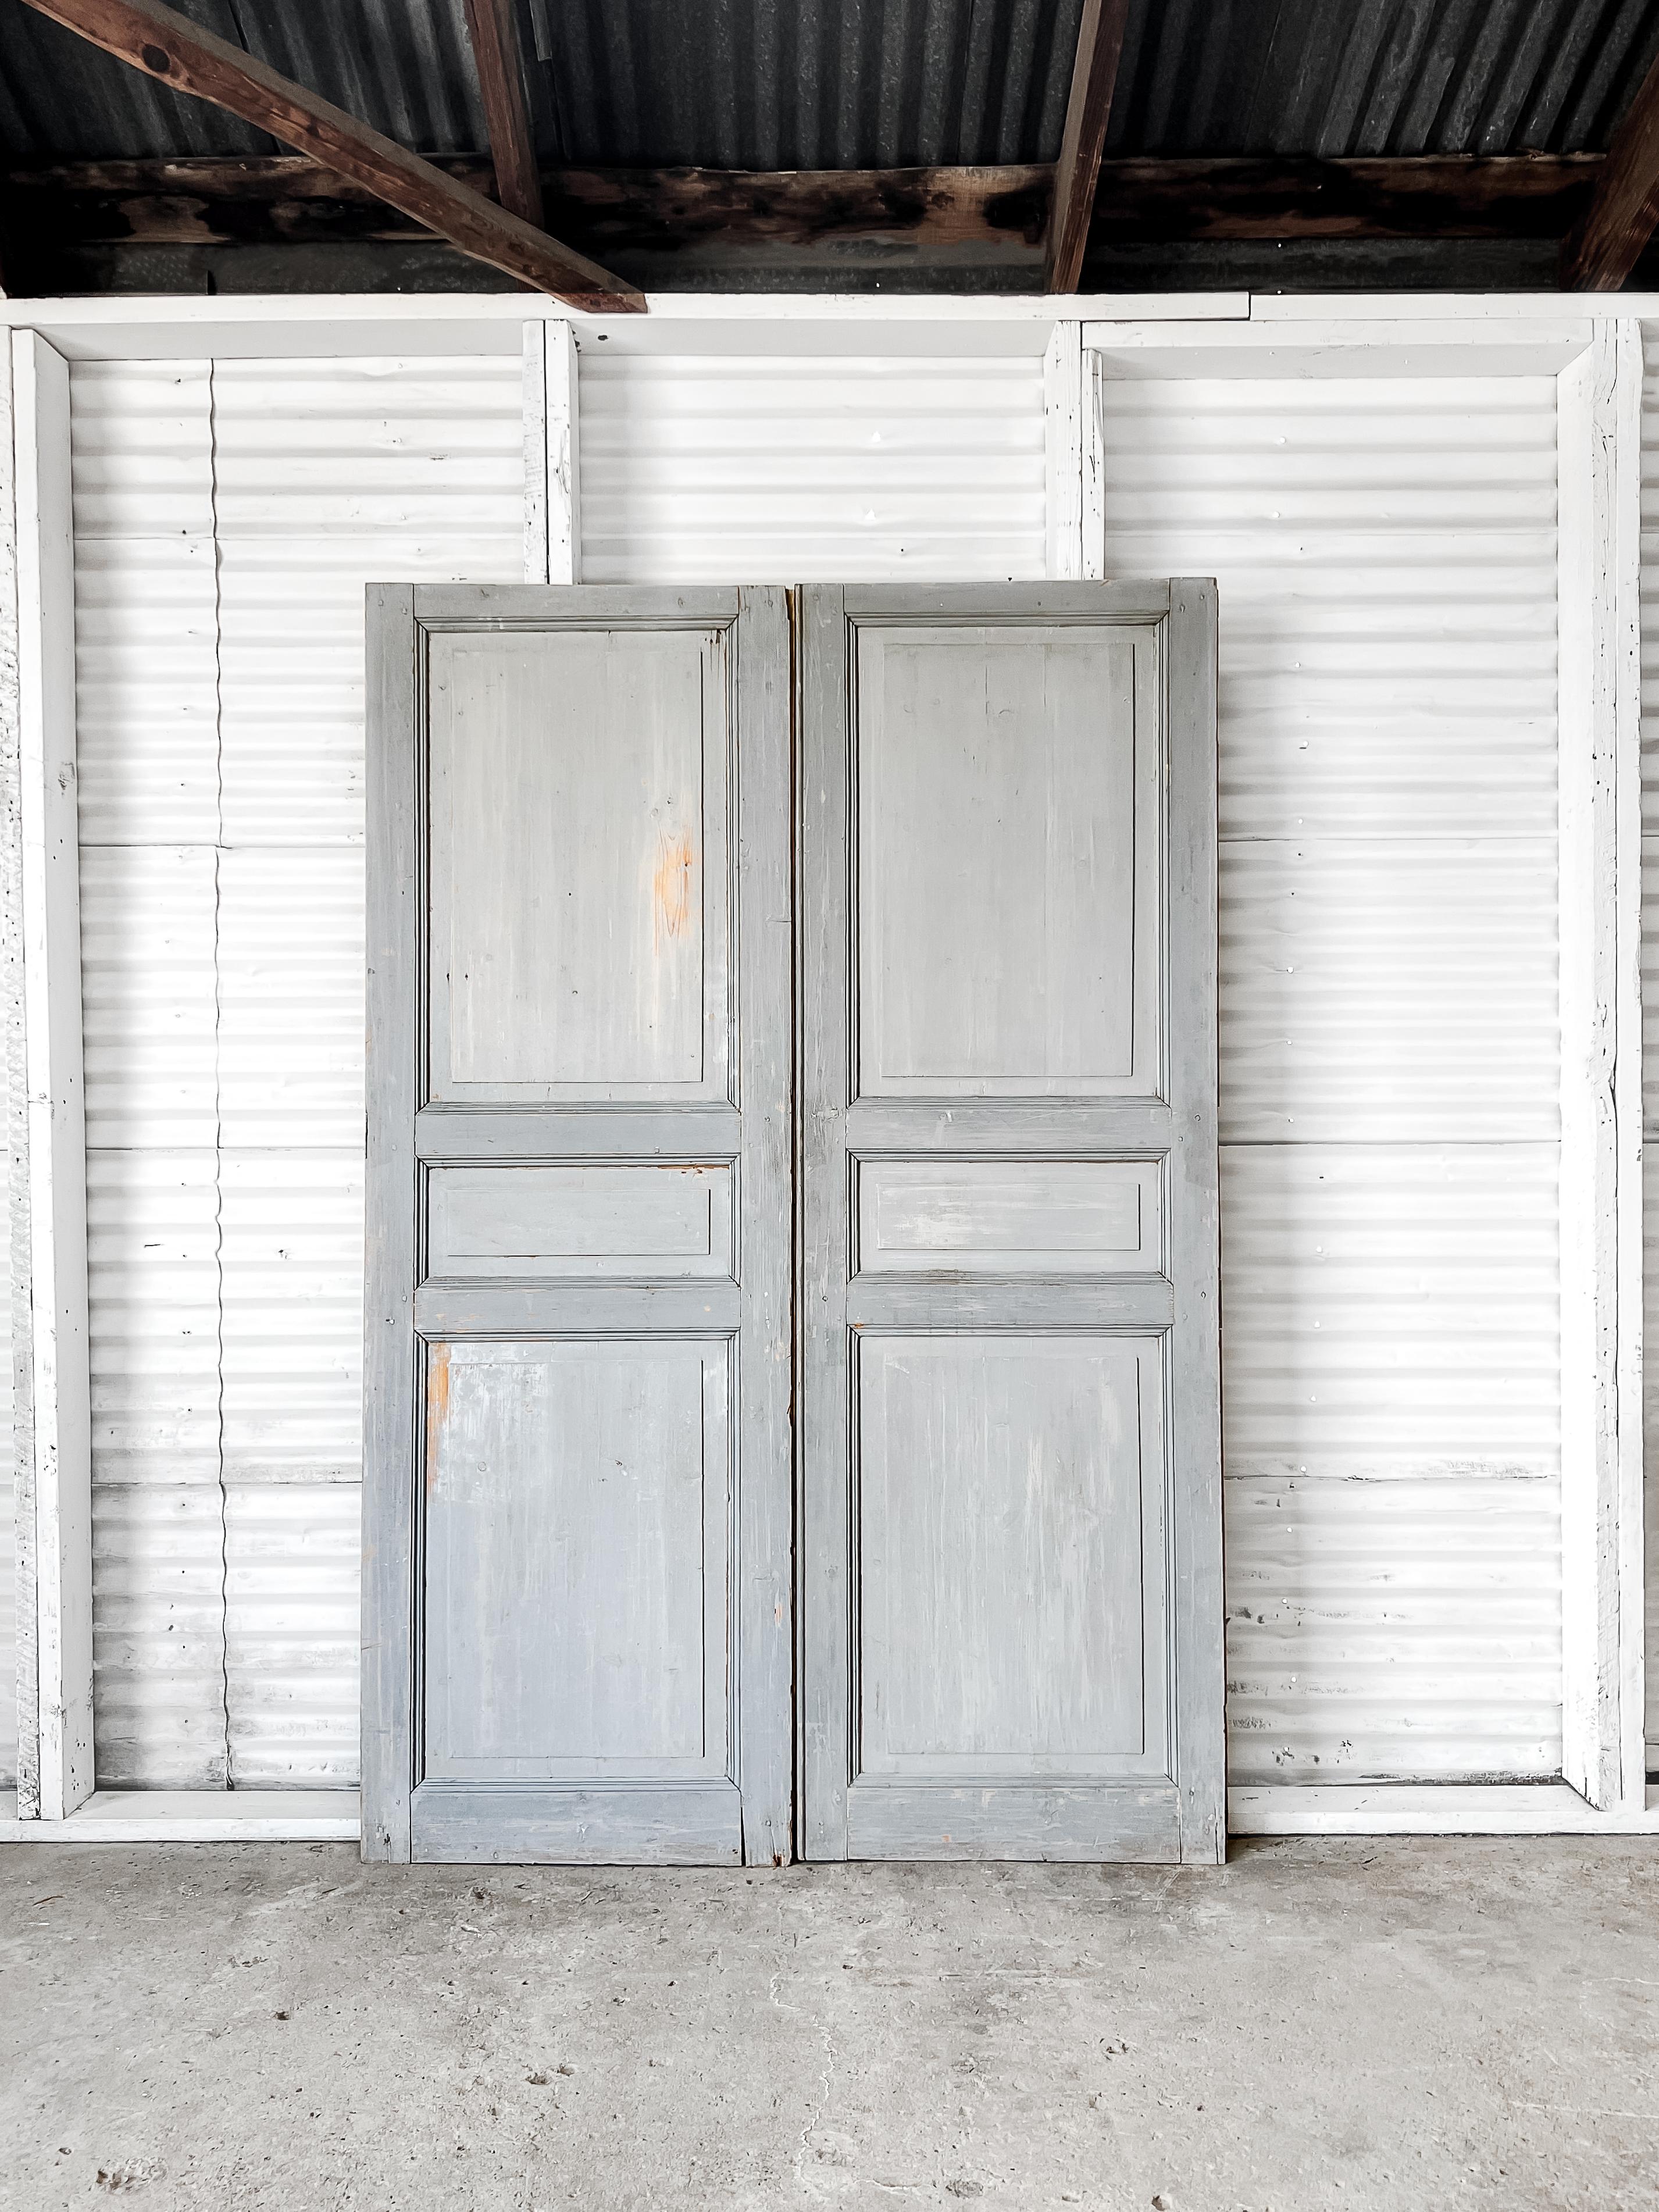 A pair of 19th-century antique French wardrobe doors. Handcrafted from solid wood, the doors feature three panels with grooved beveled trim painted in a two-tone color scheme of pale shades of blue.

The doors would be best installed to enclose a